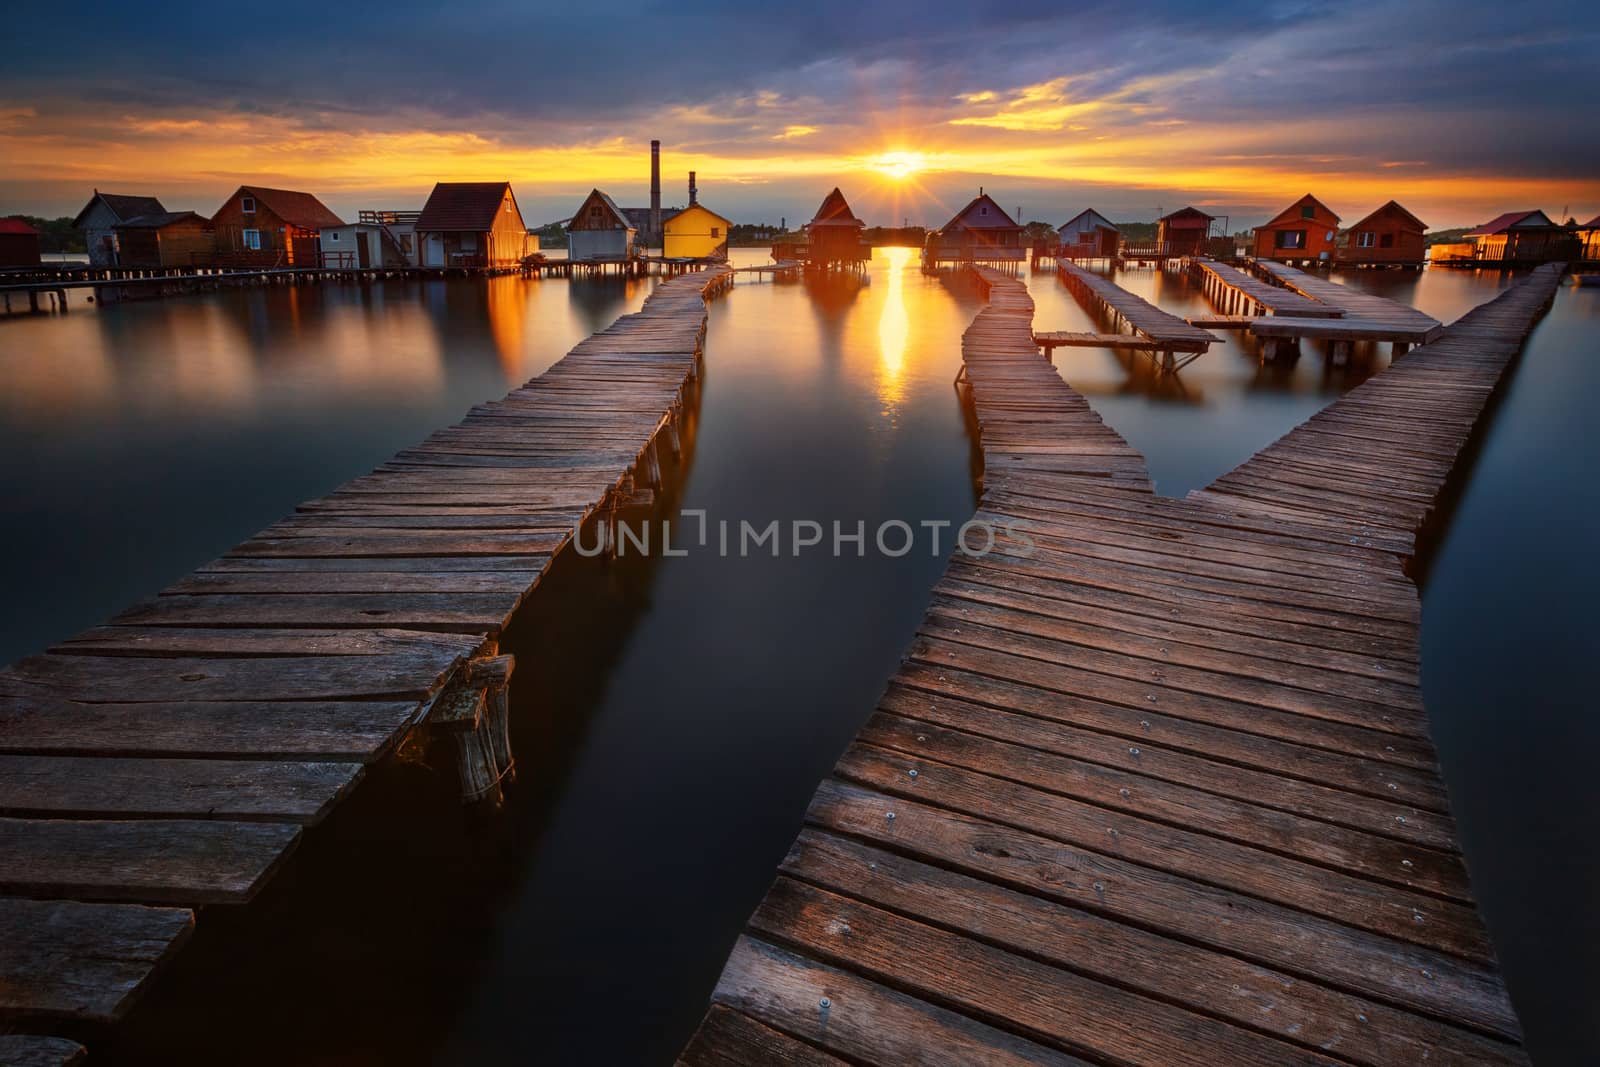 Sunset over lake Bokod with wooden pier and floating houses, Hungary by zhu_zhu